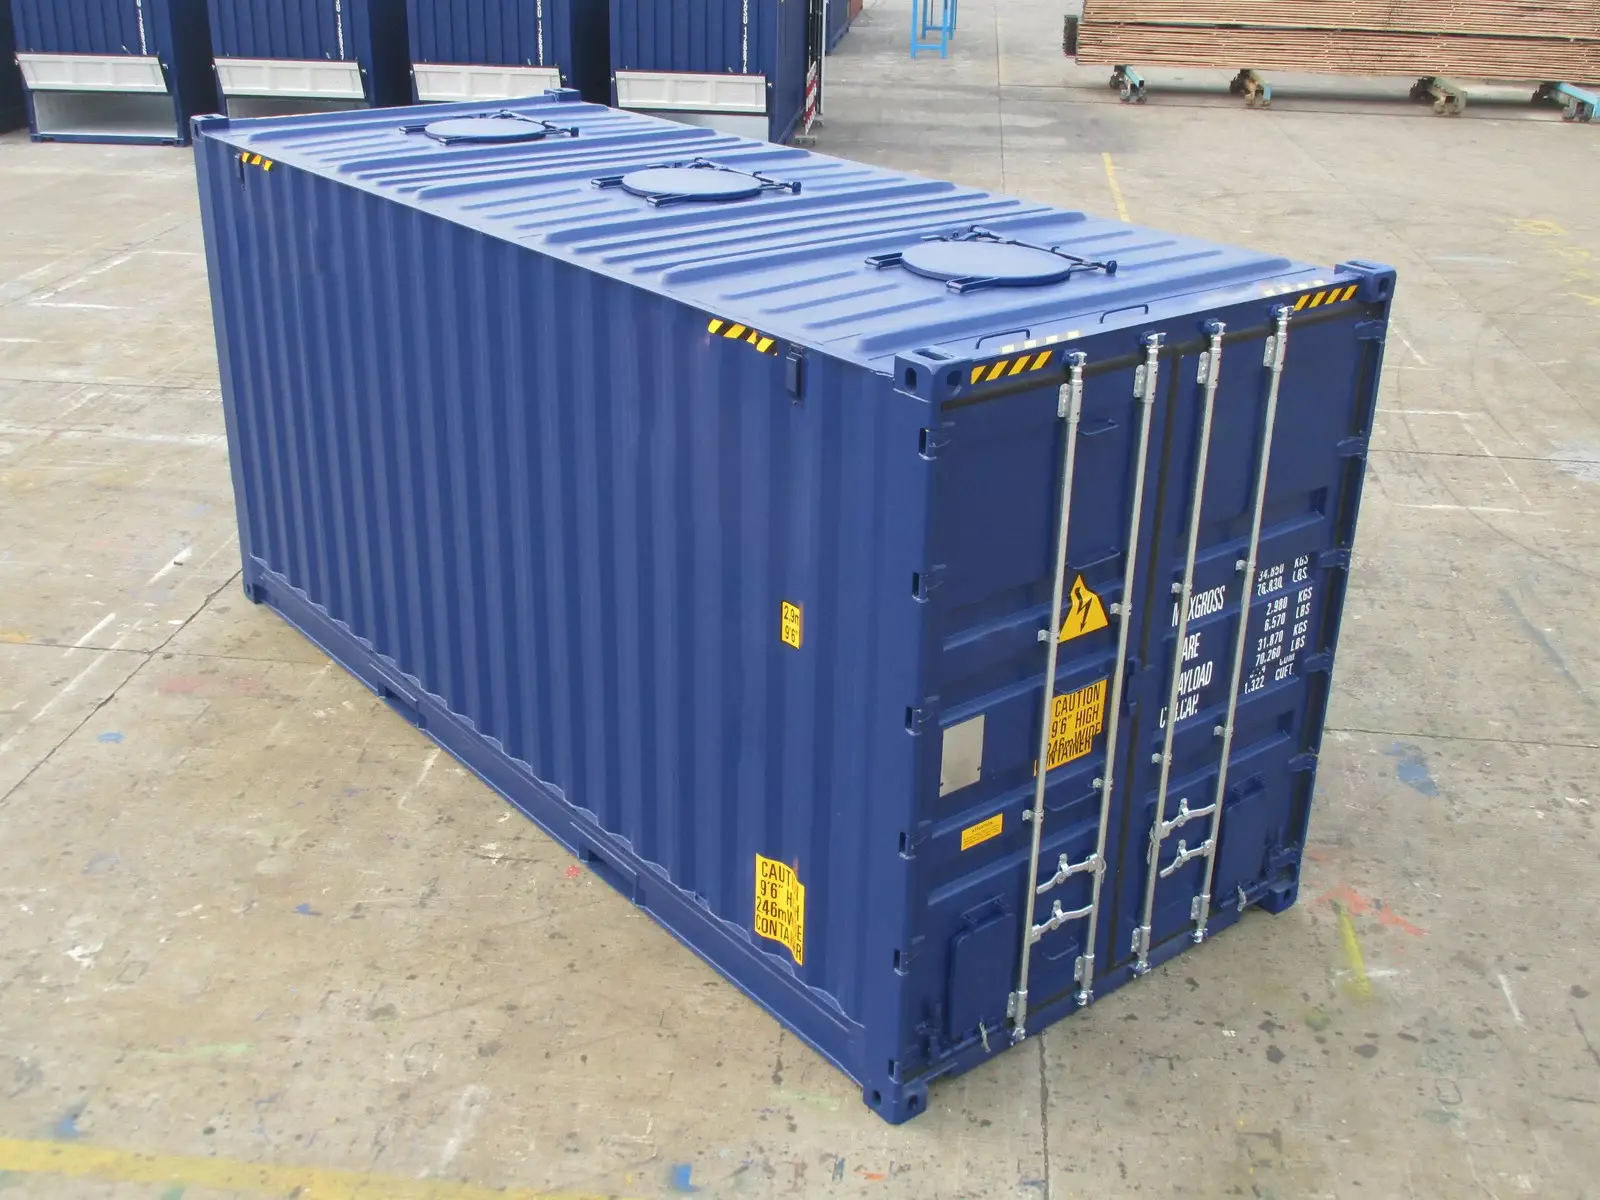 Shipping Containers For Sale in Elk Grove